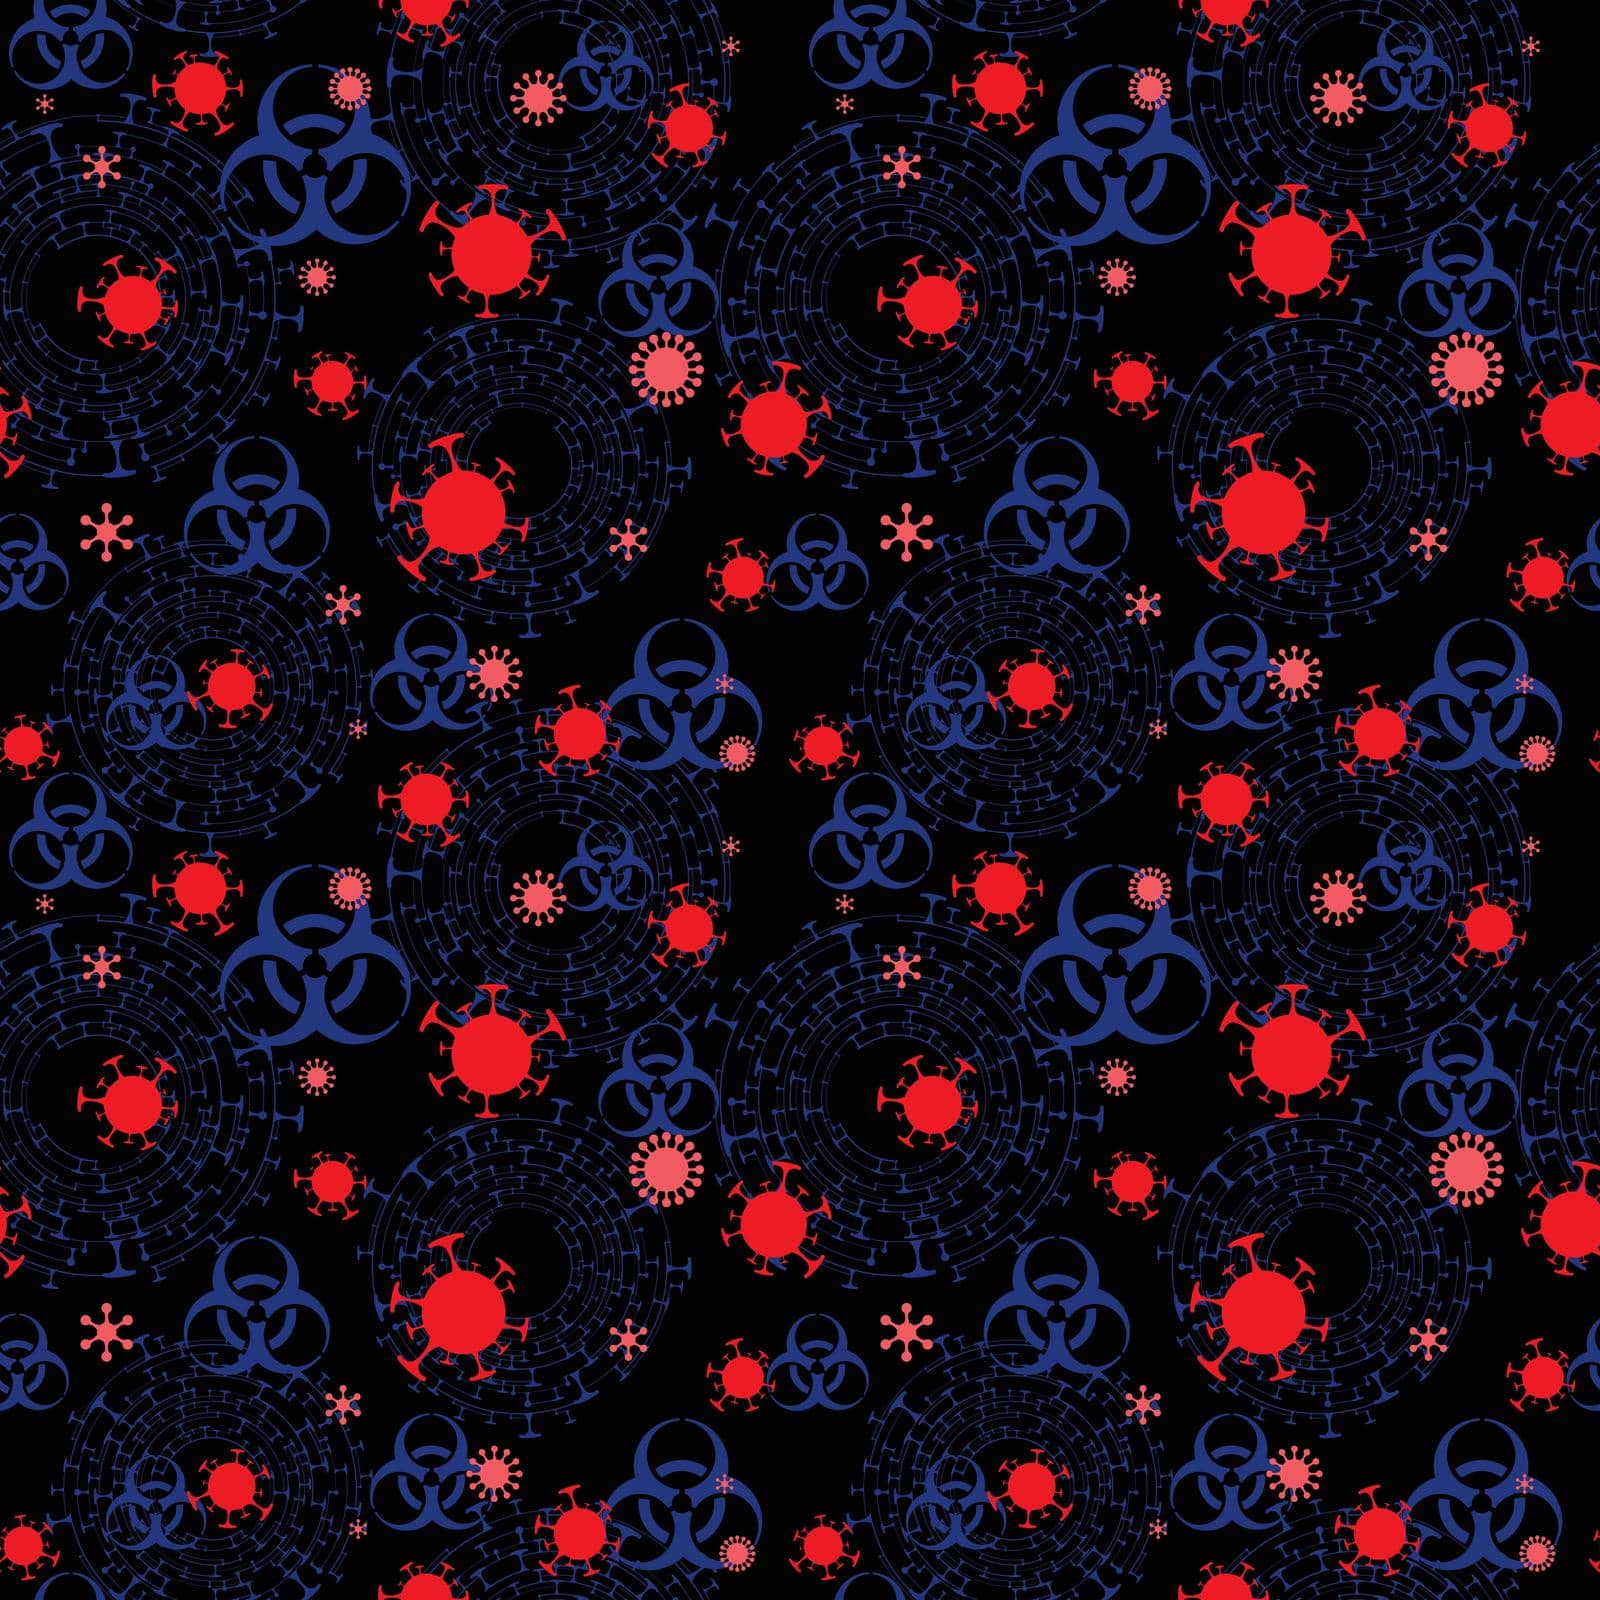 Corona Virus Outbreak Red and Blue Vector Pattern by kisika